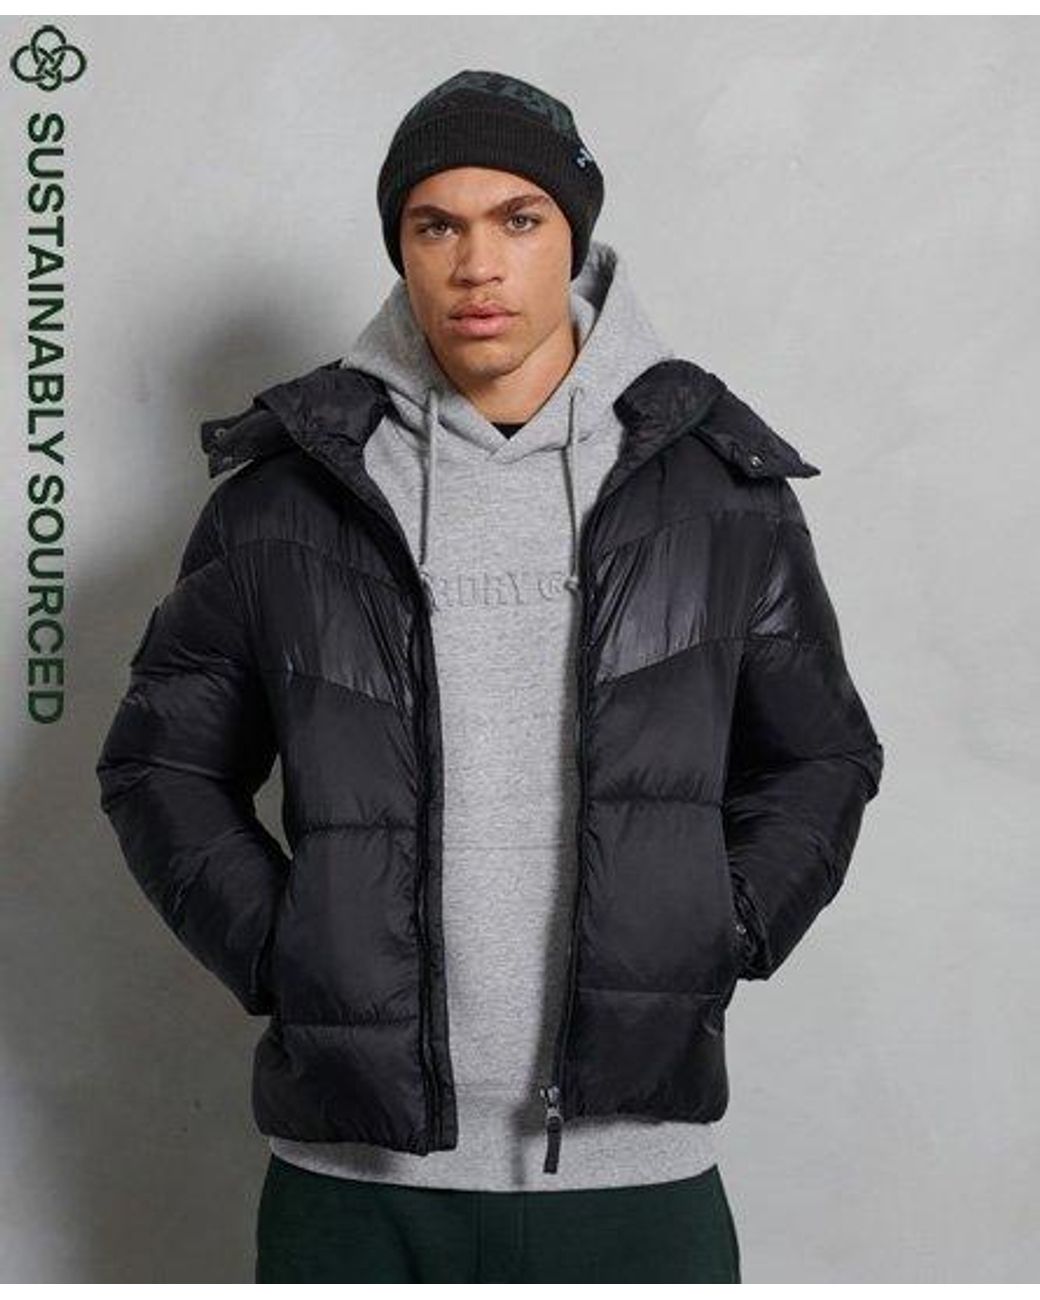 Superdry Synthetic Stratus Padded Jacket in Black for Men - Lyst